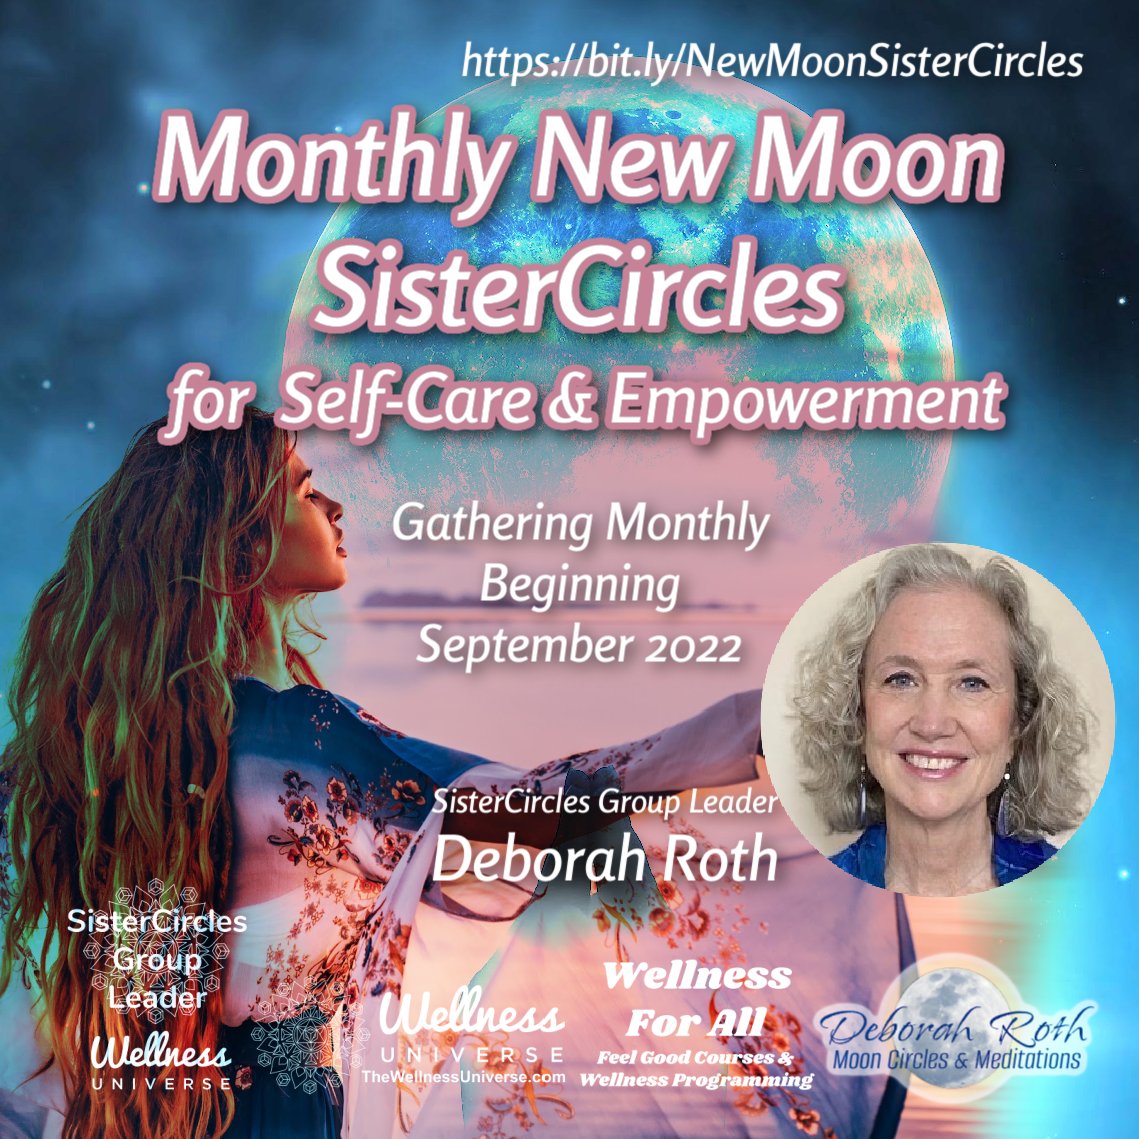 LIVE IN 2 DAYS!

Meet @CoachDebRoth #Spiritual Life & #CareerTransitionCoach, #RelationshipCoach, & Interfaith Minister leading @TheWellnessUniv #WellnessforAll Monthly #NewMoon #SisterCircles gatherings. Join here ✨ bit.ly/NewMoonSisterC… #selfcare